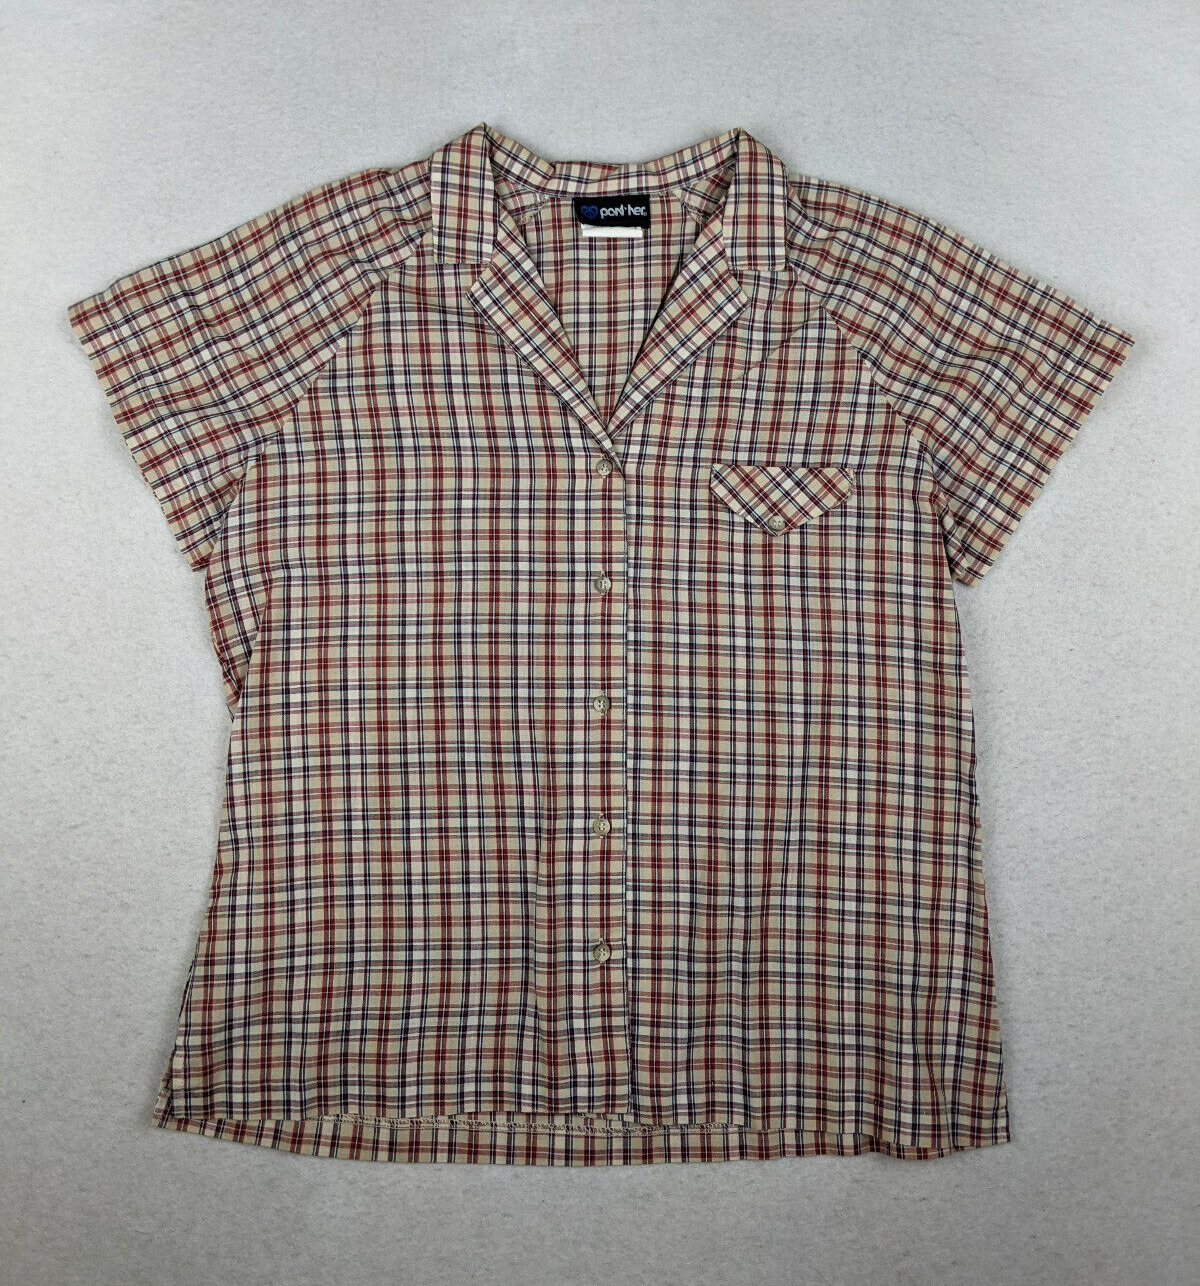 VINTAGE 70s WOMEN\'S BROWN BEIGE PLAID SHORT SLEEVE BUTTON-UP SHIRT TOP - PANTHER